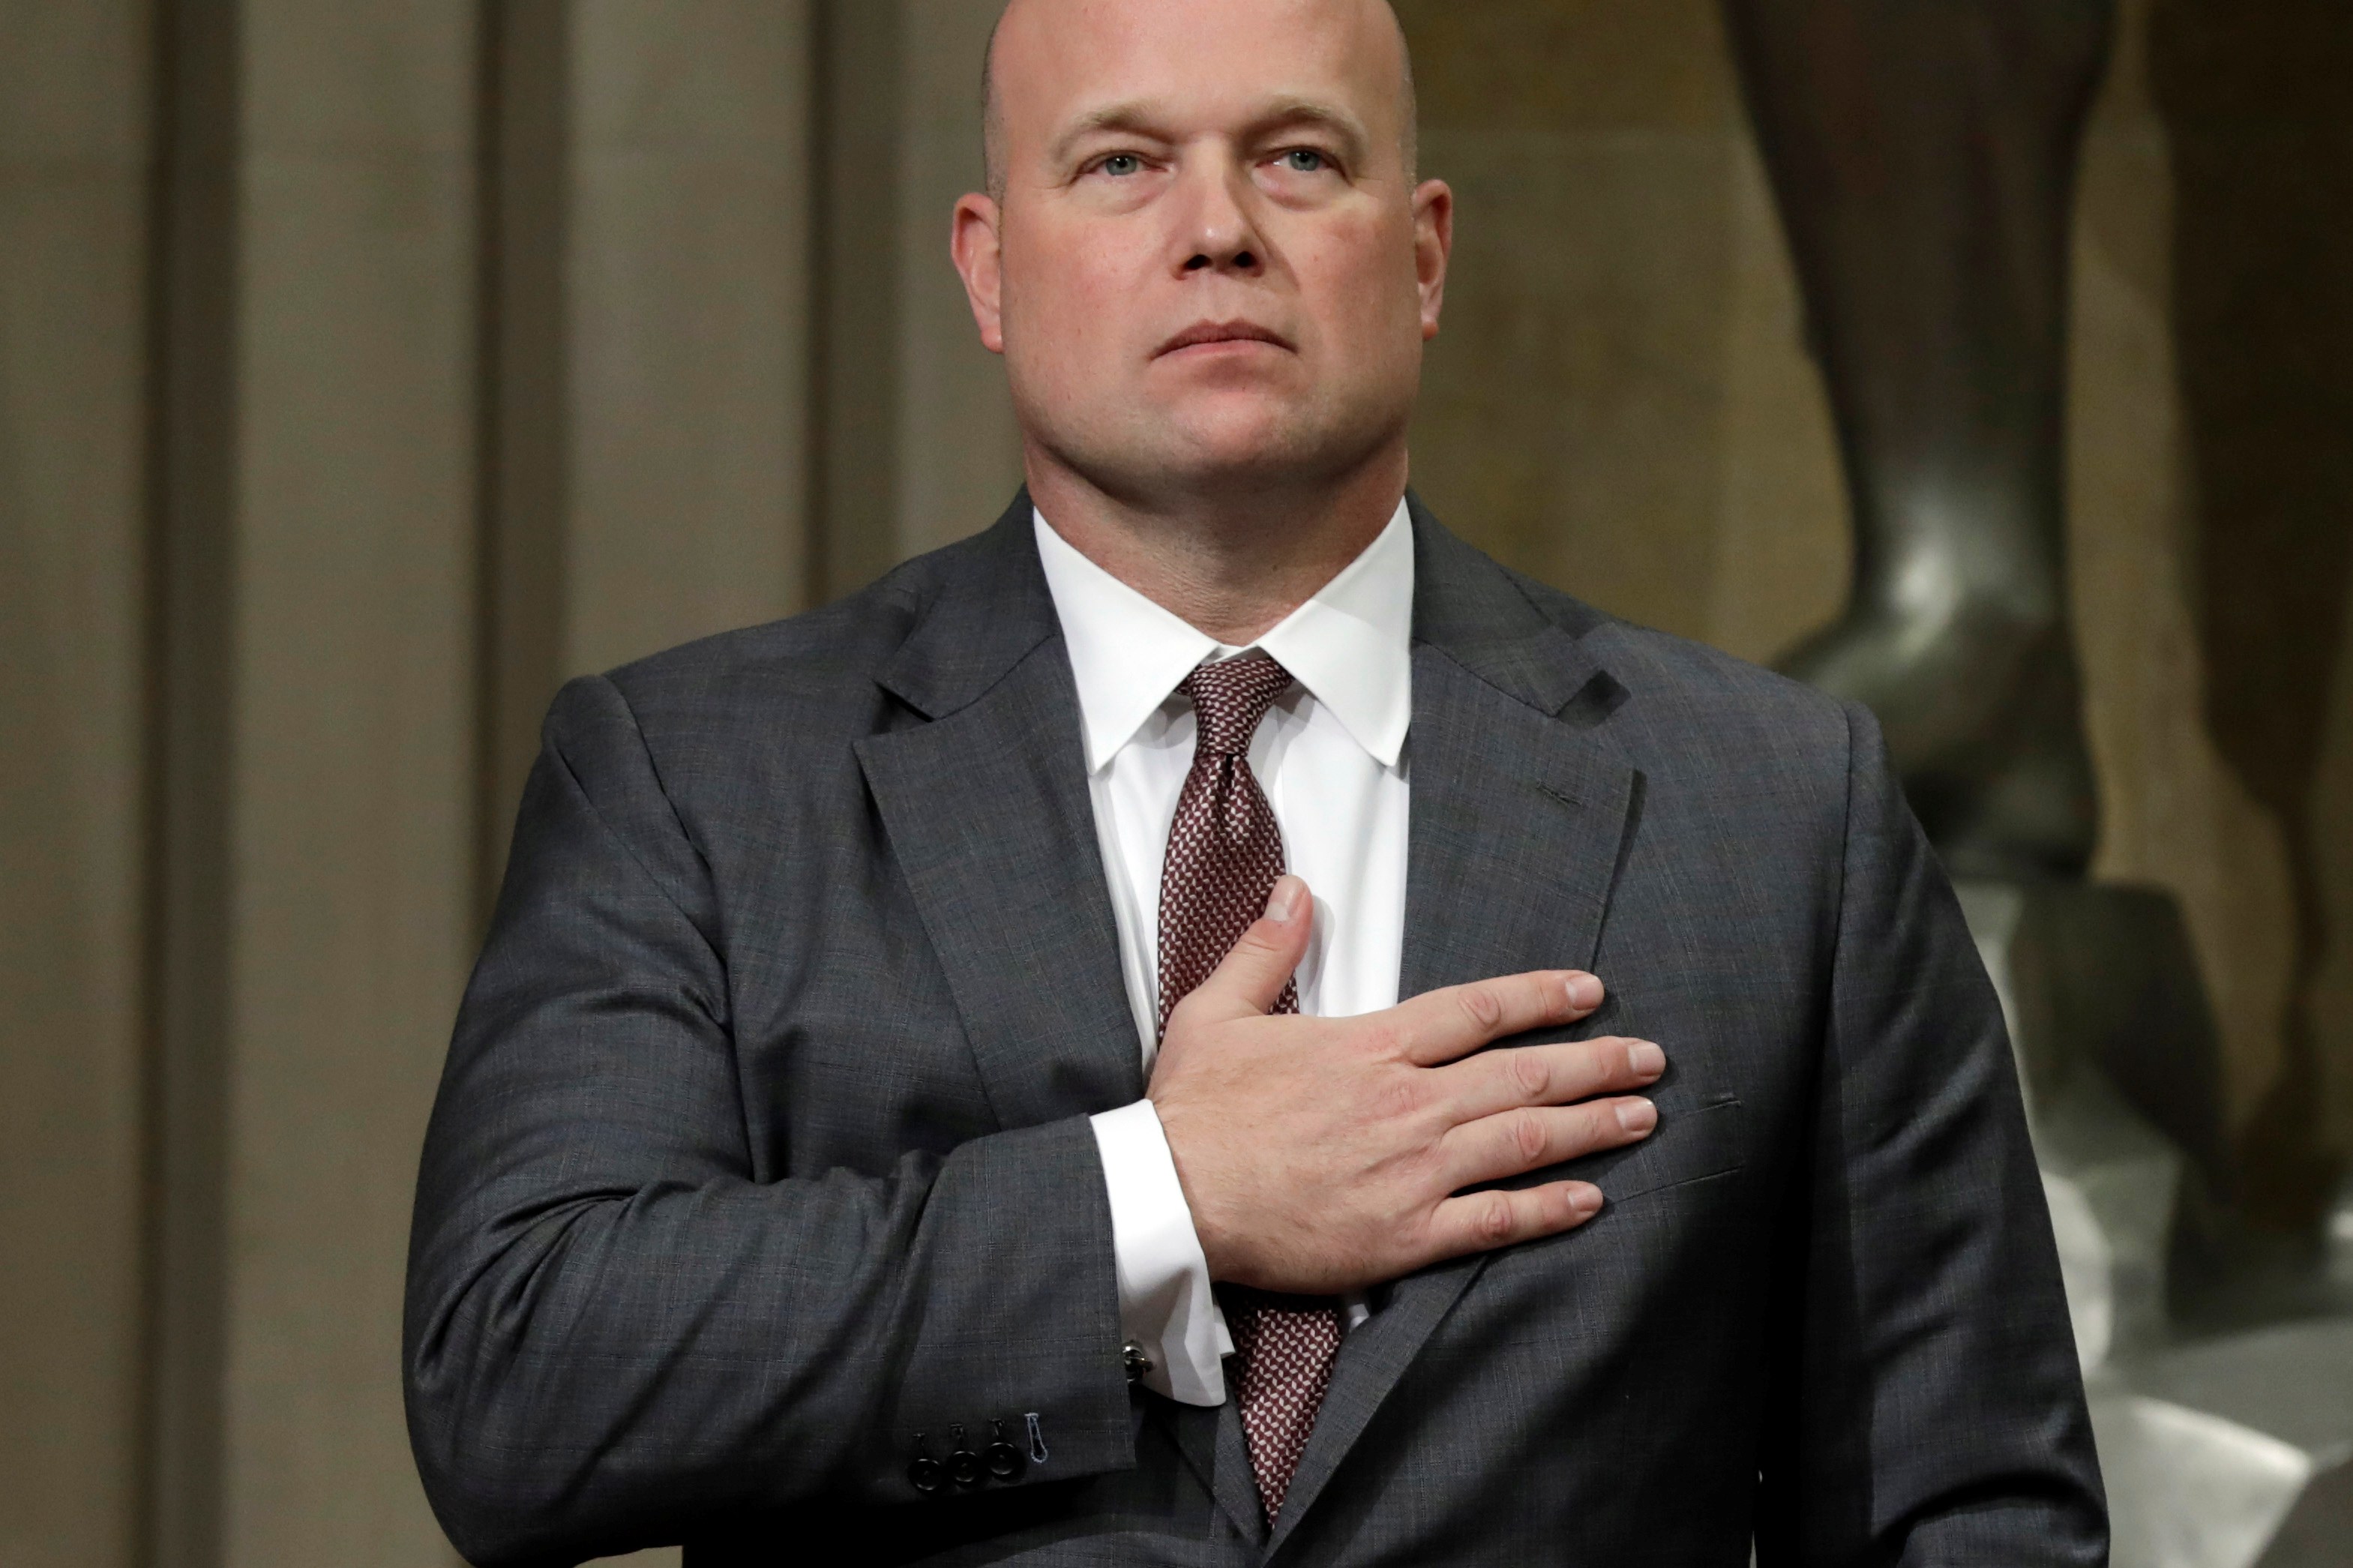 Acting Attorney General Matthew Whitaker stands during the Annual Veterans Appreciation Day Ceremony at the Justice Department in Washington. REUTERS/Yuri Gripas